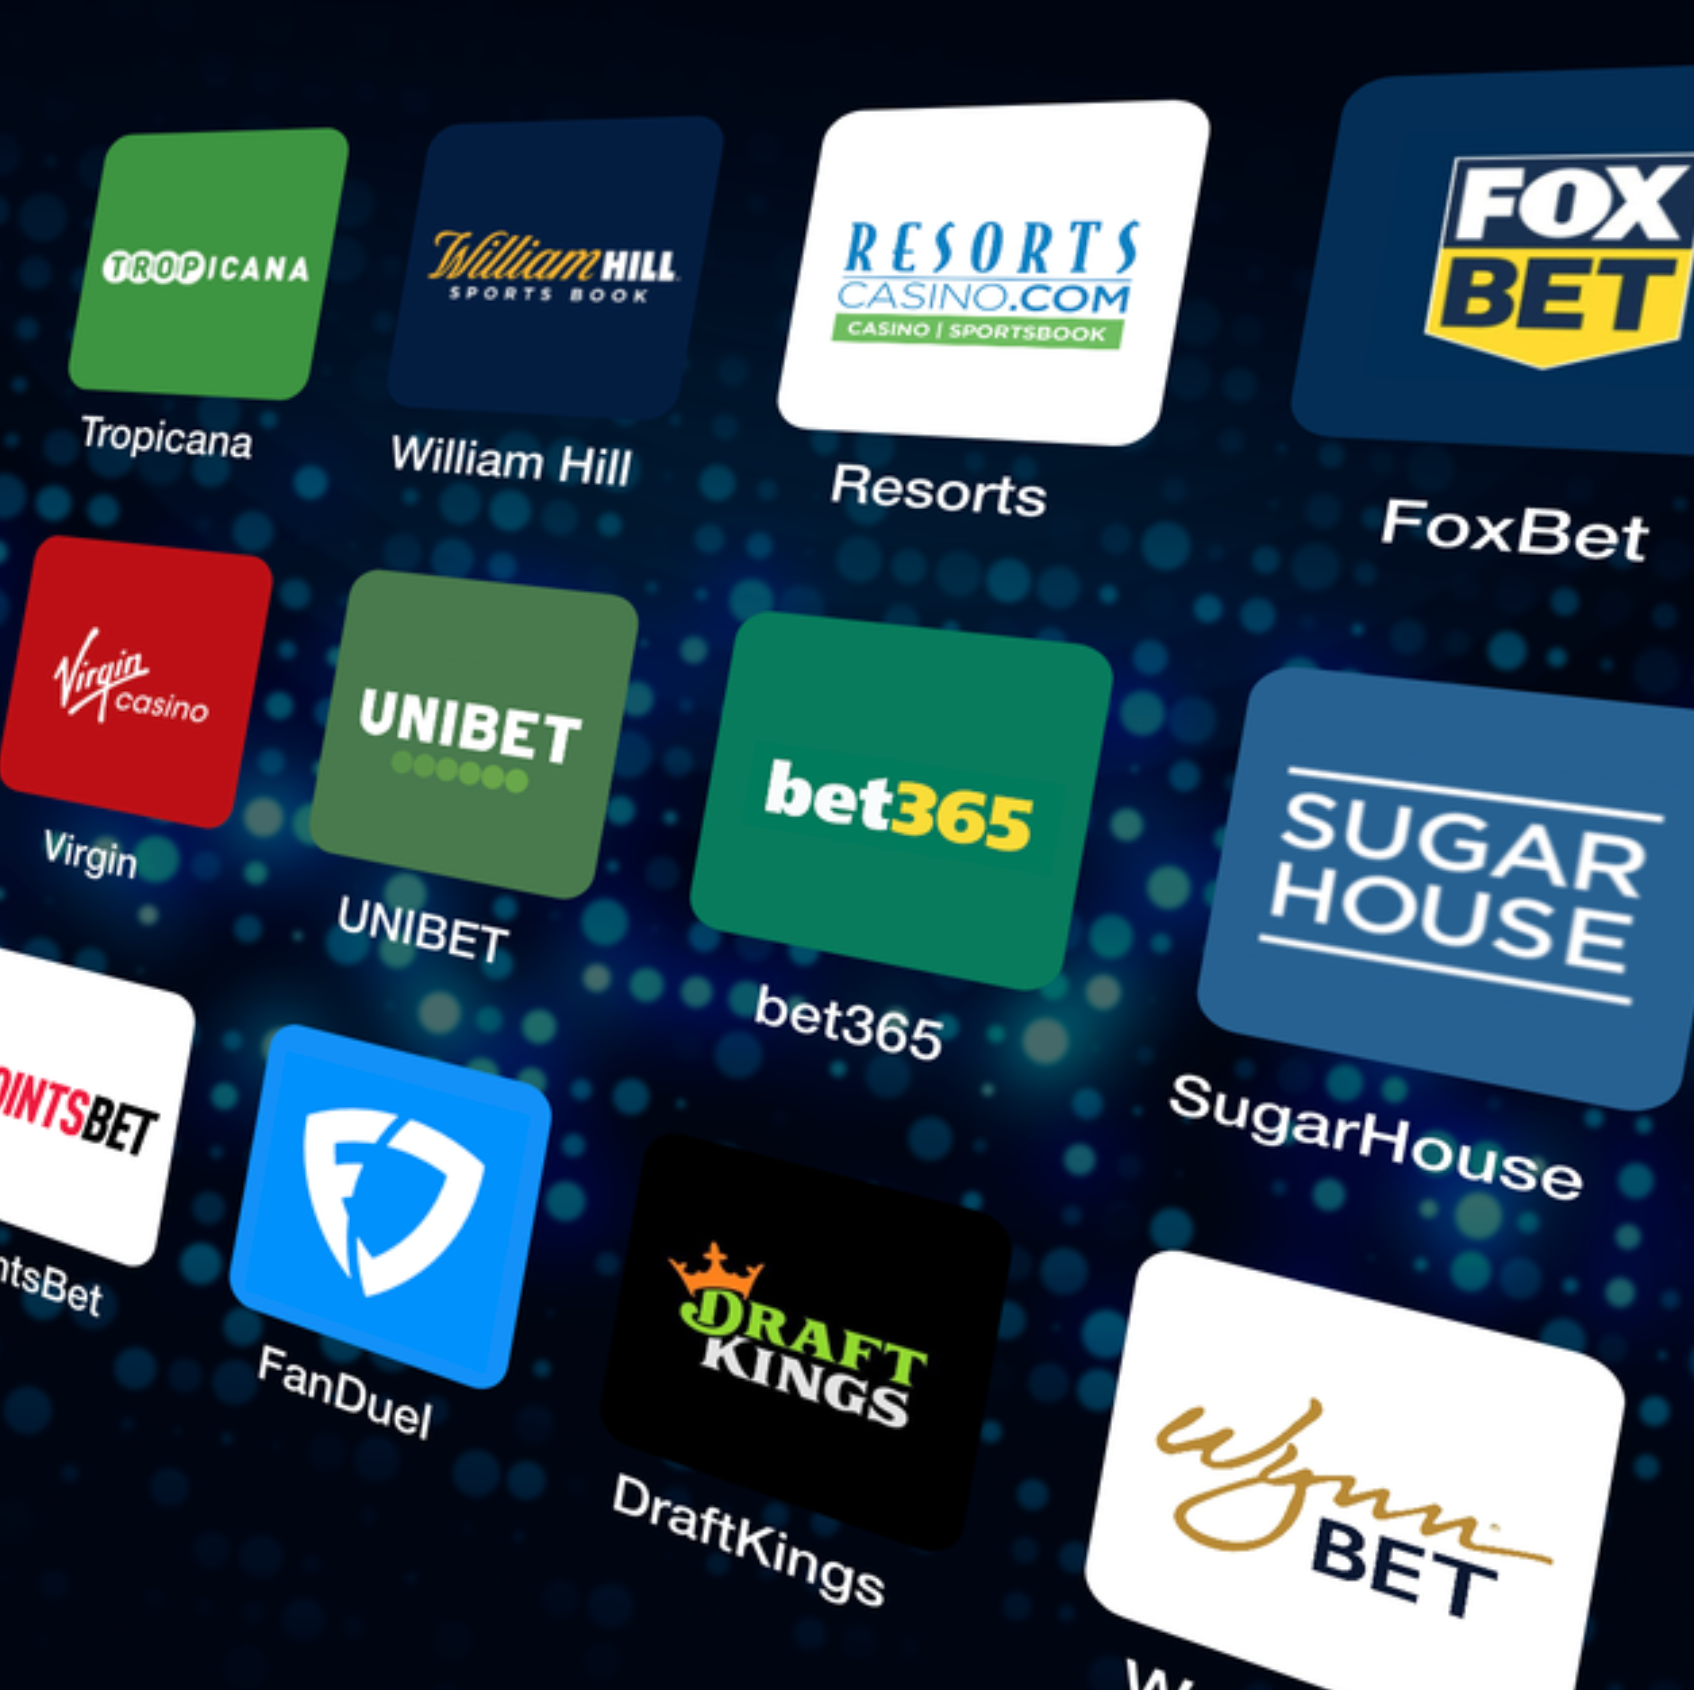 Best Betting App In India: An Incredibly Easy Method That Works For All